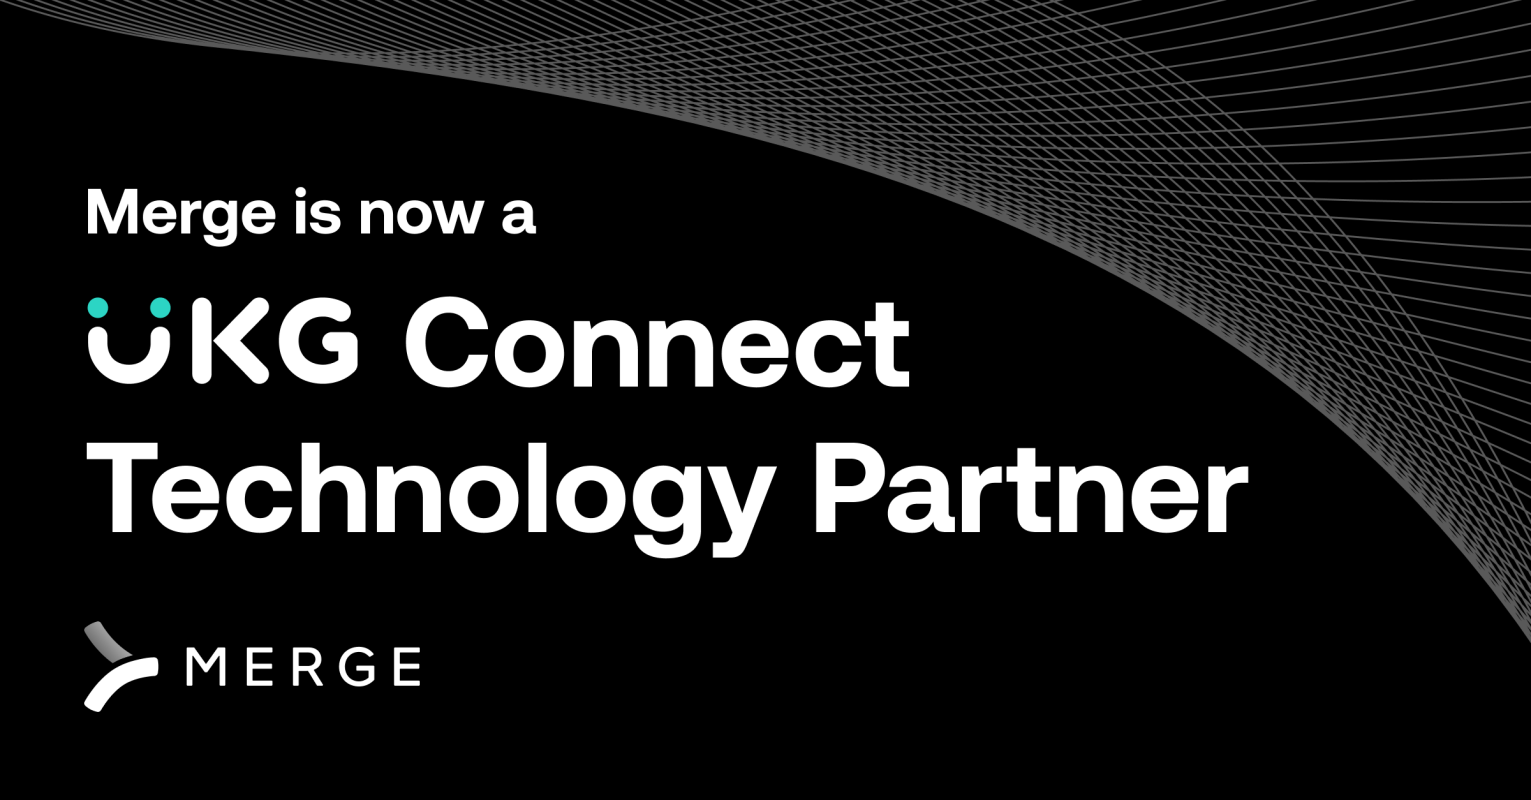 Announcing Merge's Partnership with UKG